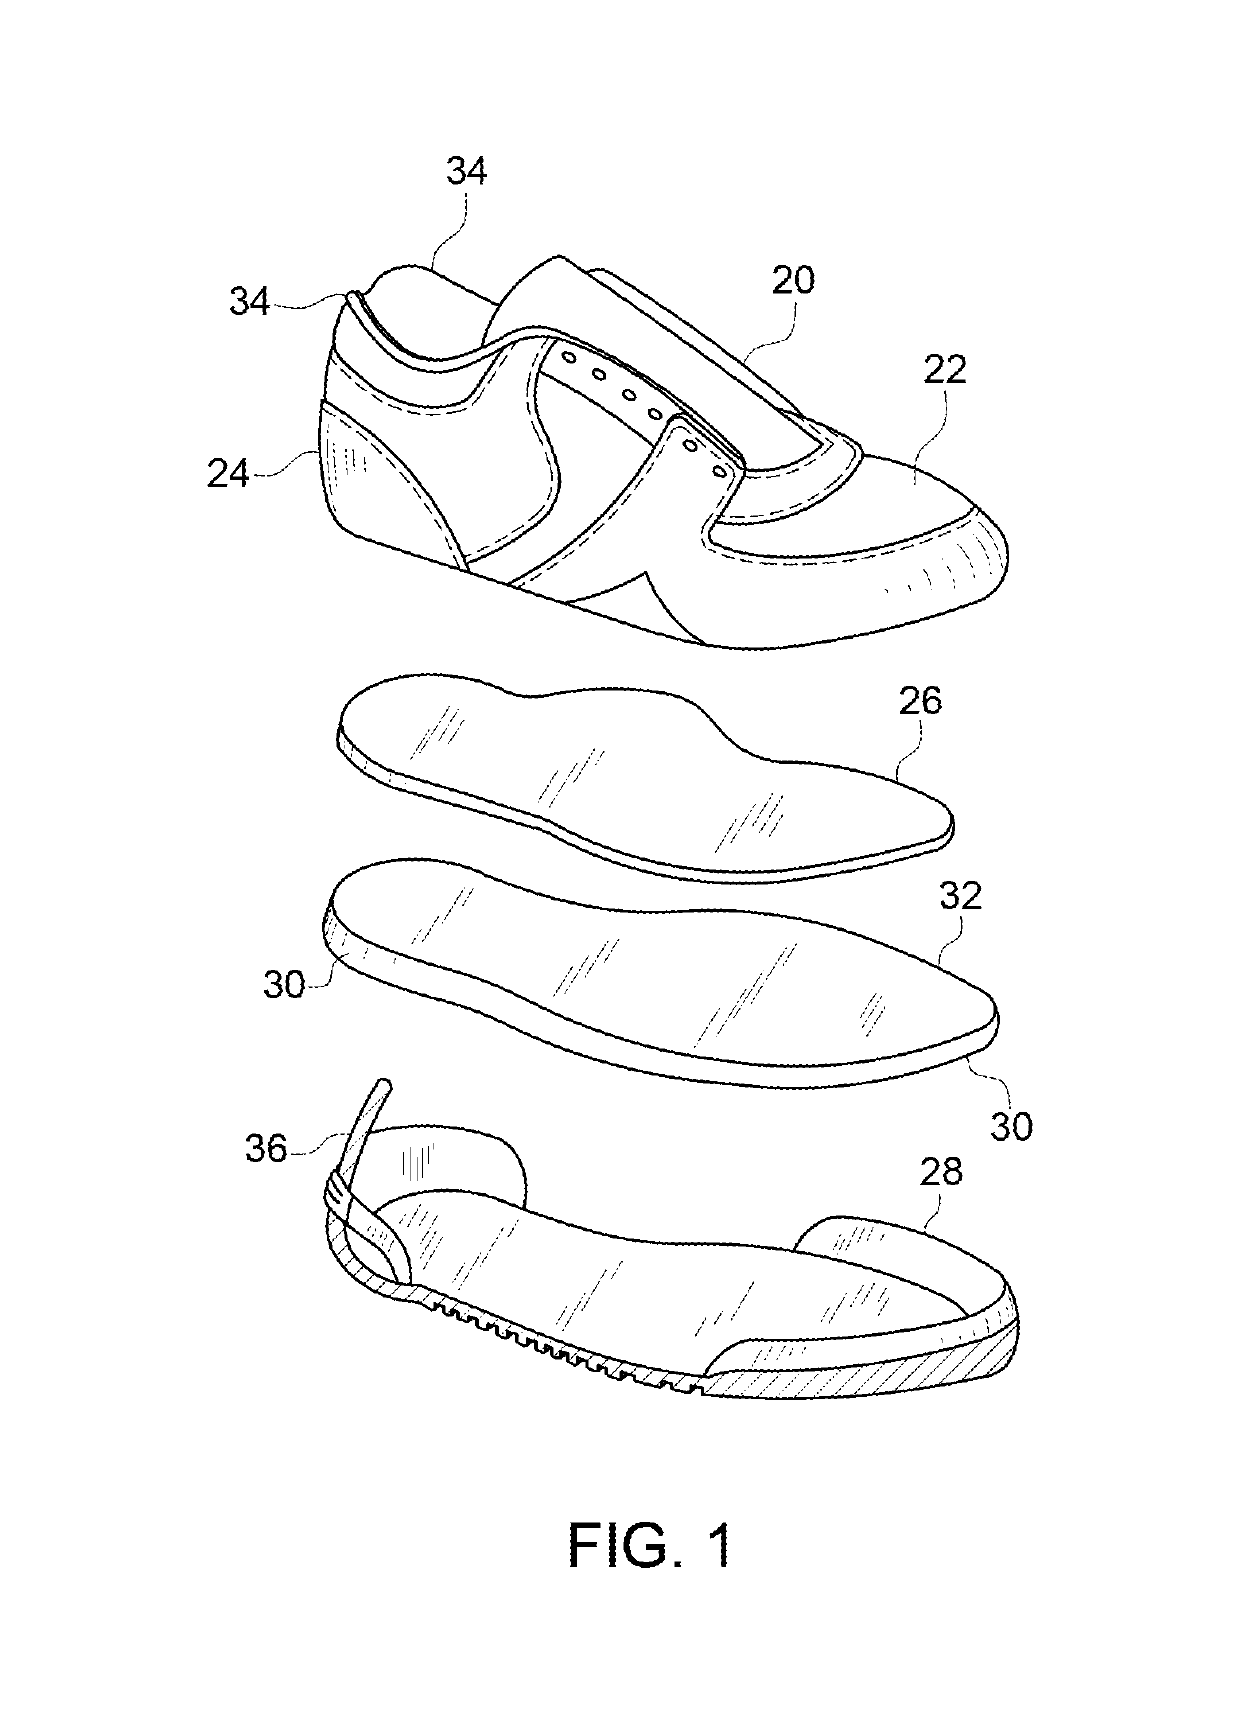 Electrically conductive footwear utilizing earthing technology for enhancing human performance